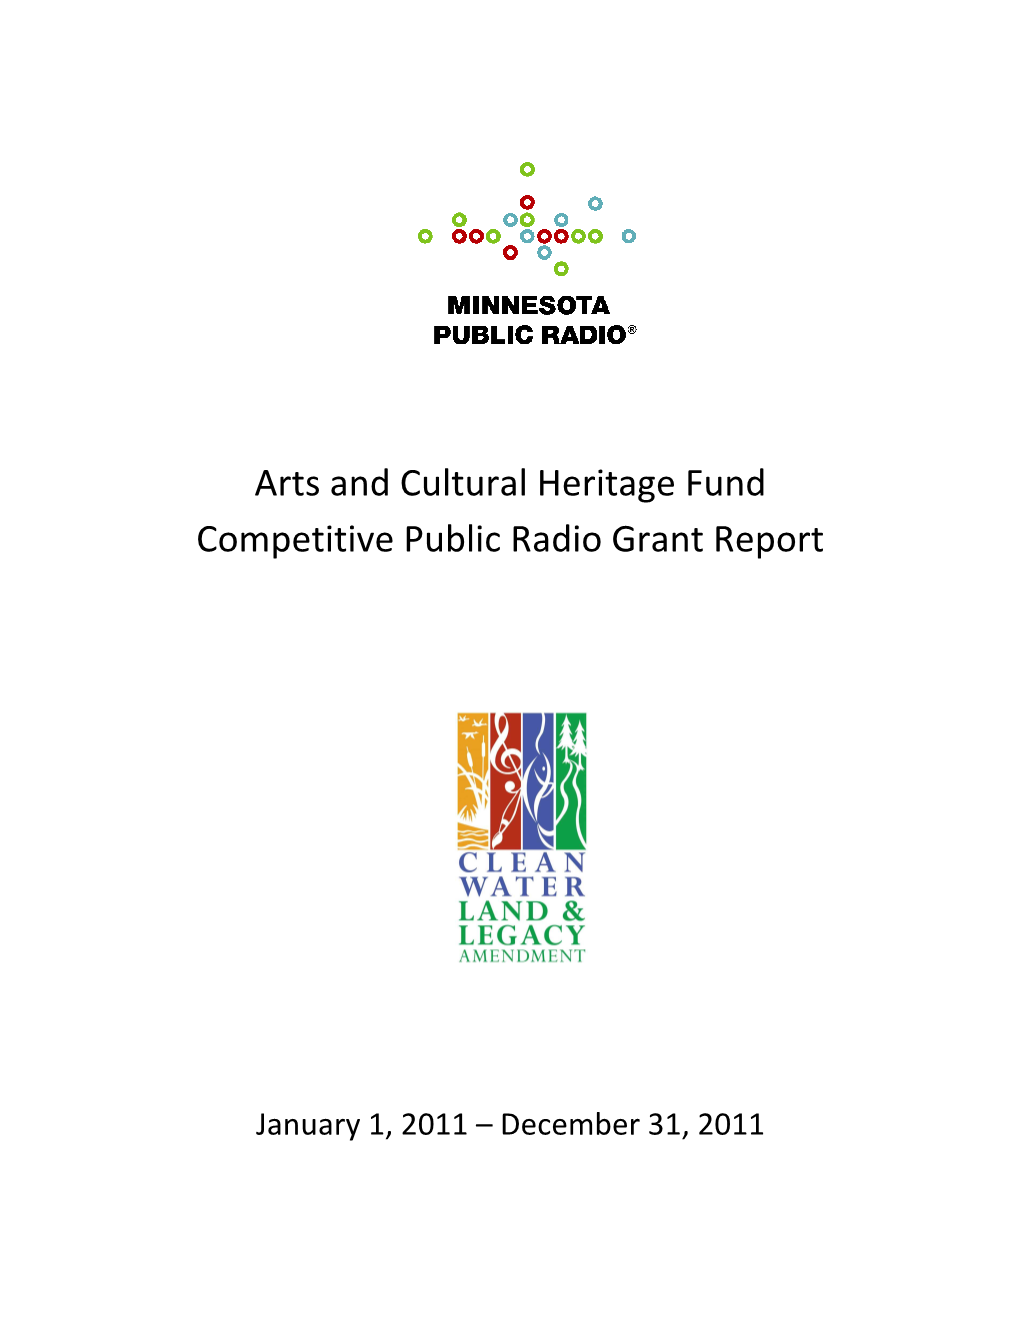 Arts and Cultural Heritage Fund Competitive Public Radio Grant Report